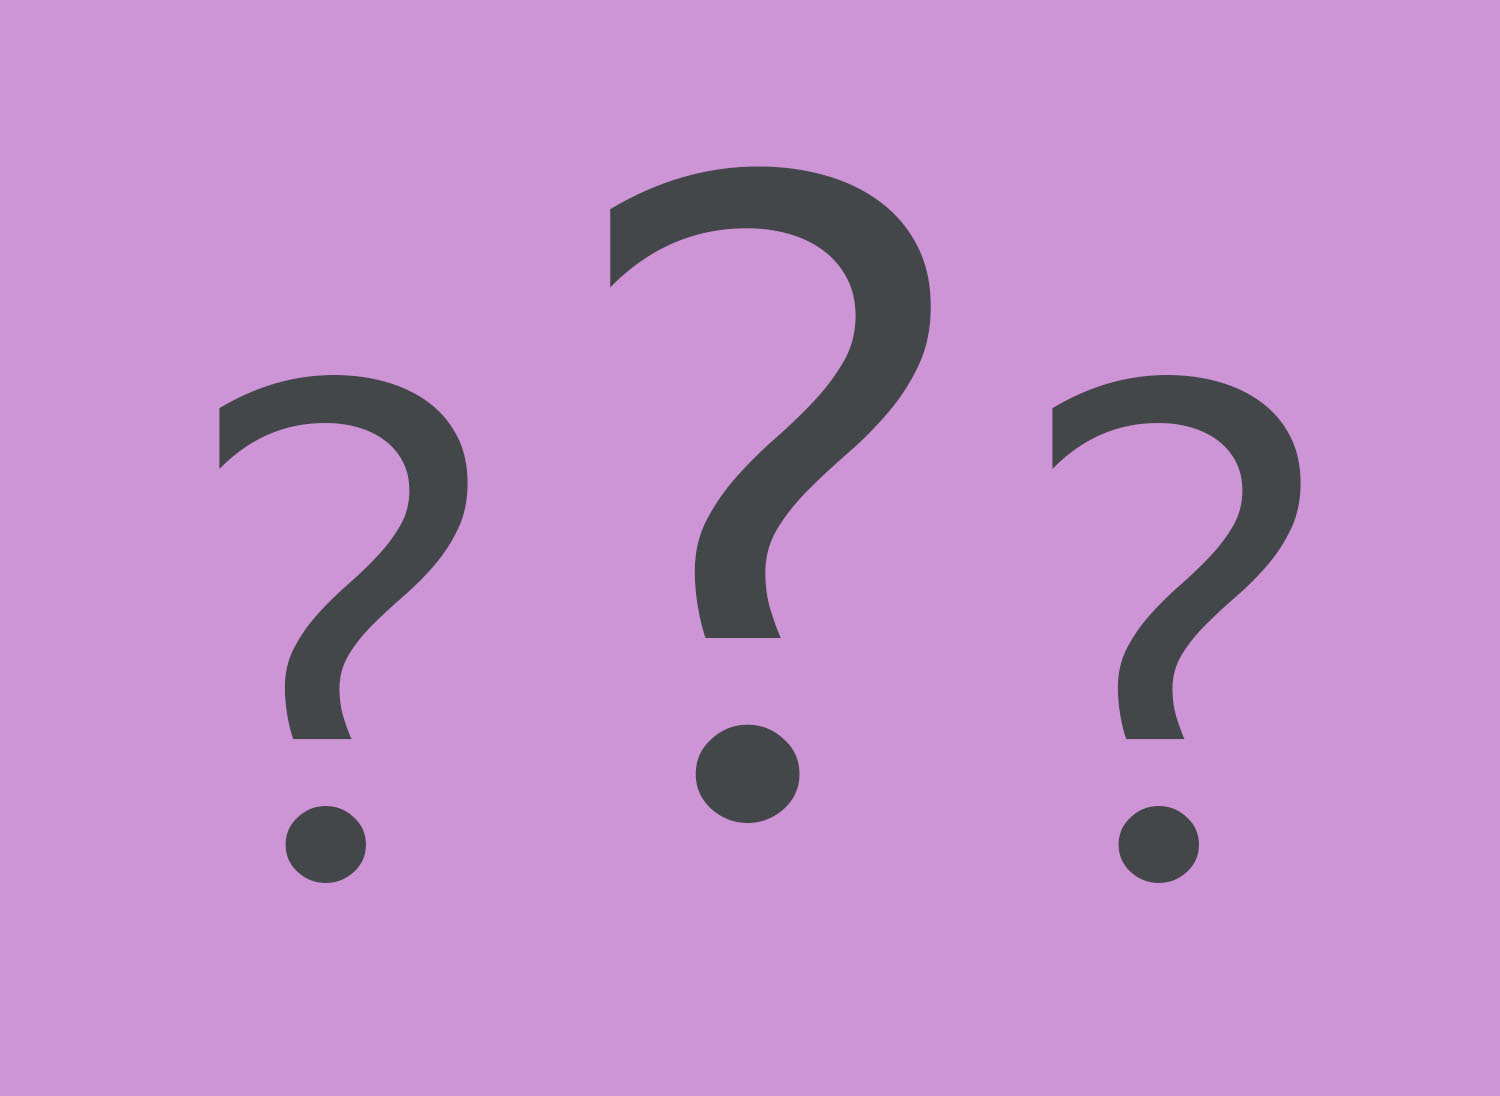 Assessments Logo. Includes 3 gray question marks on a purple background.